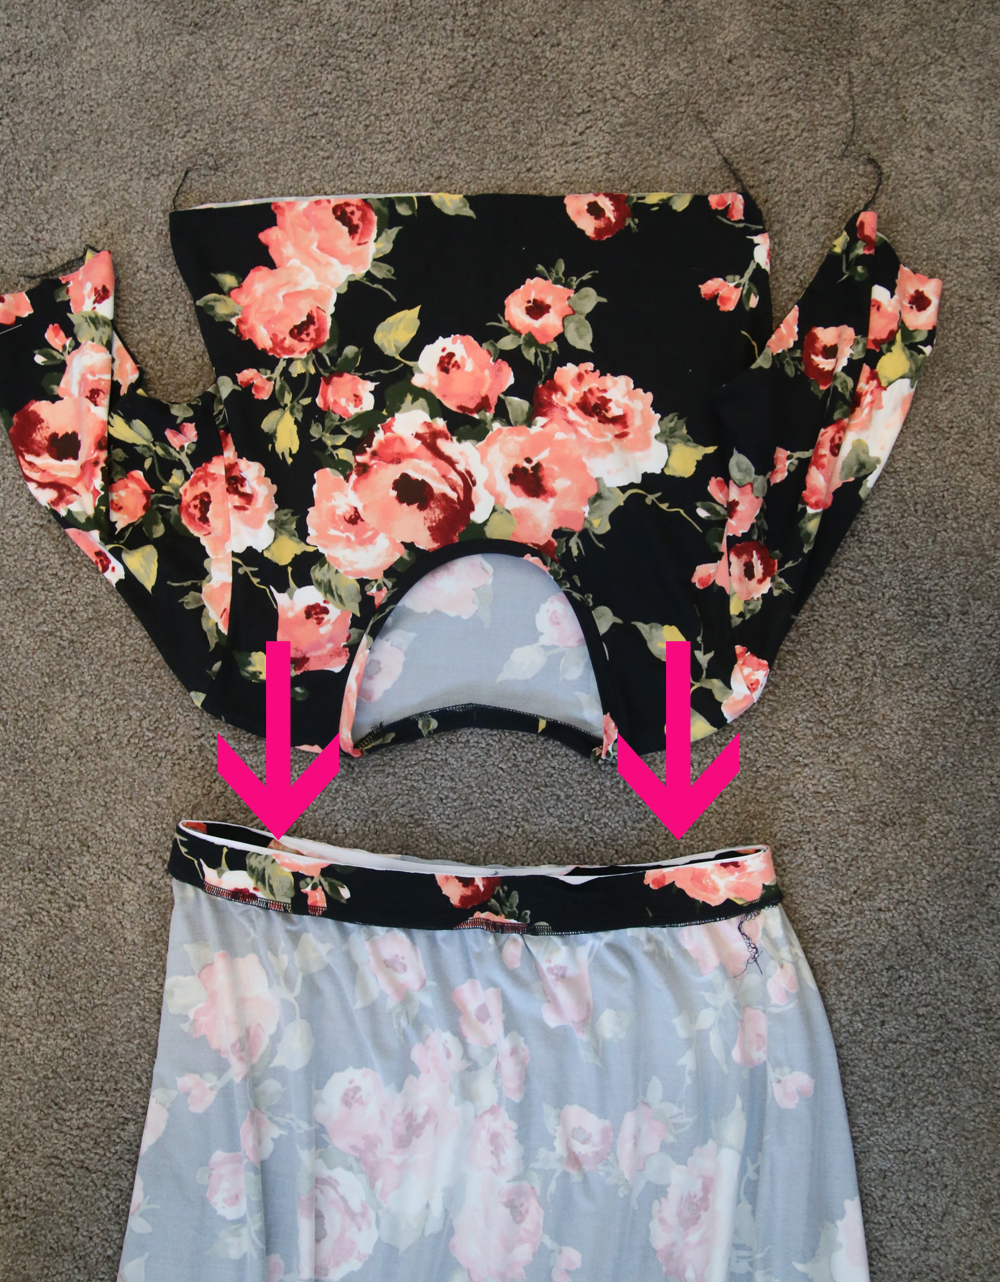 The bodice of the dress upsidedown, with arrows to show it goes inside the skirt which is inside out